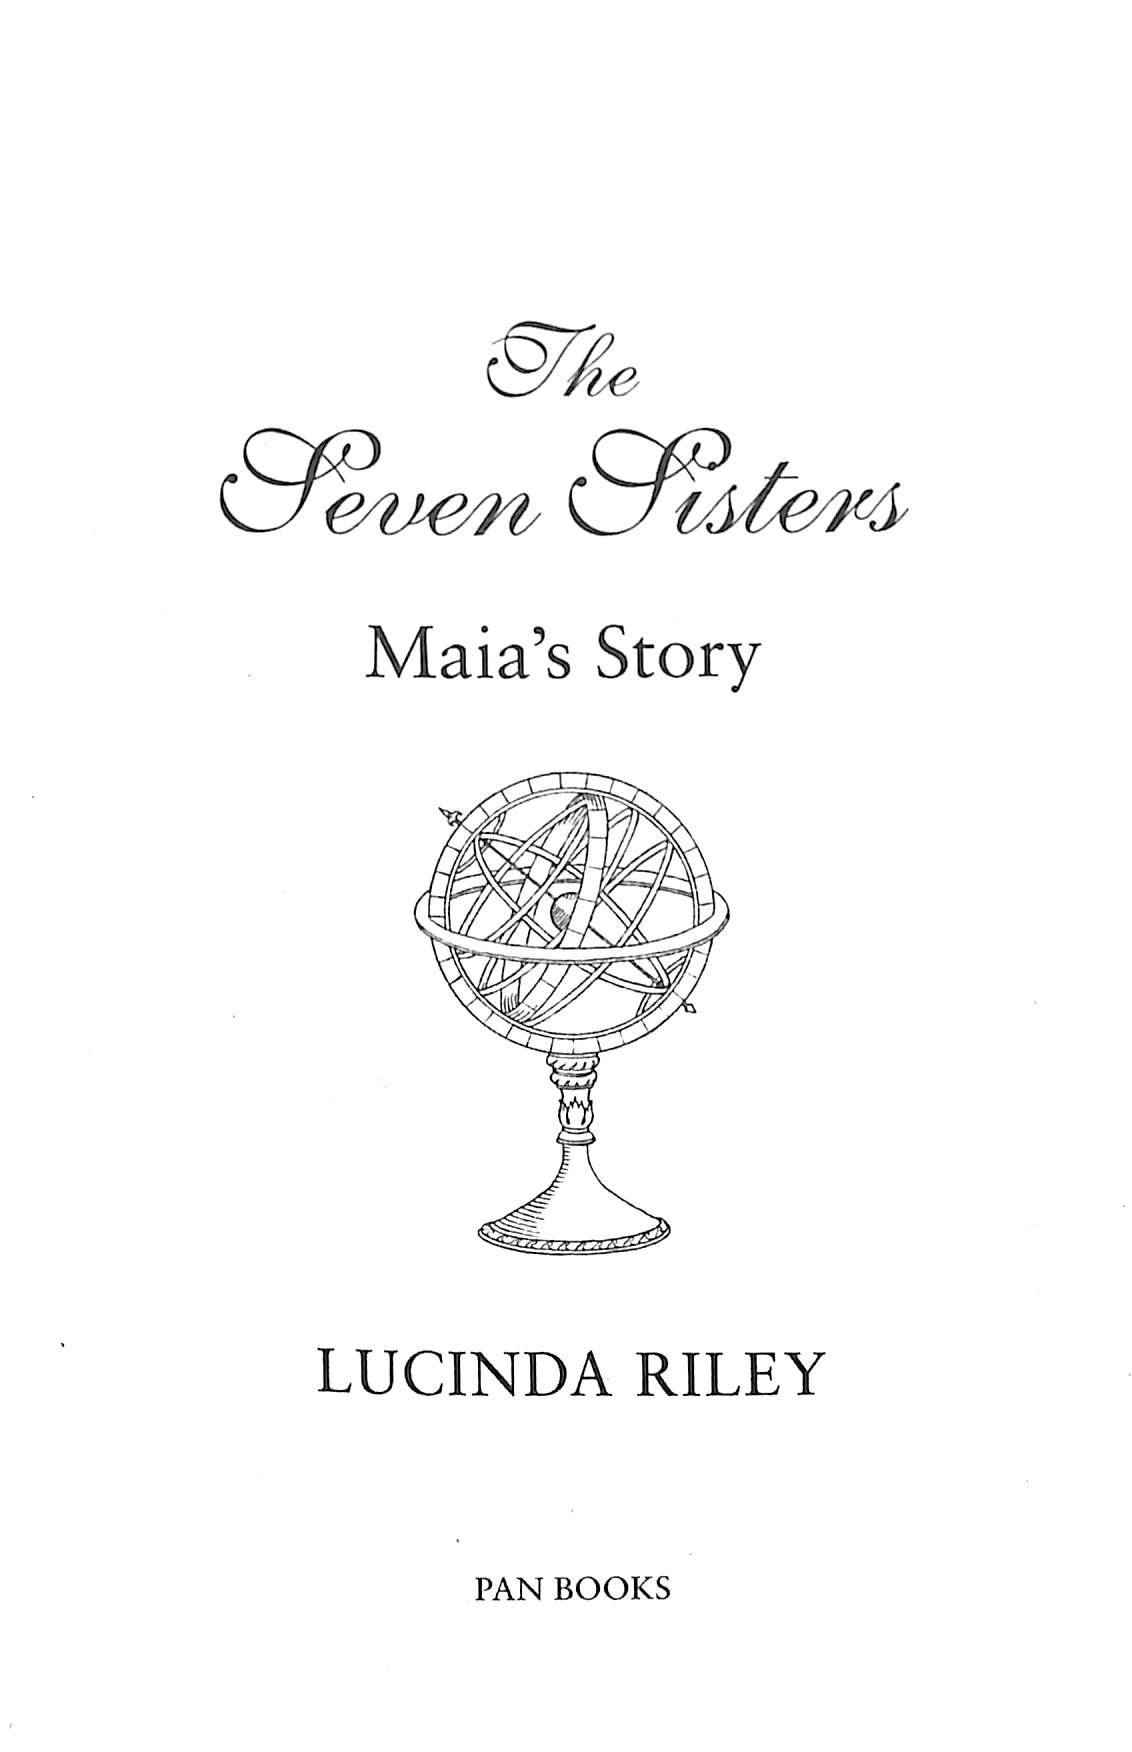 The seven sisters by Lucinda Riley